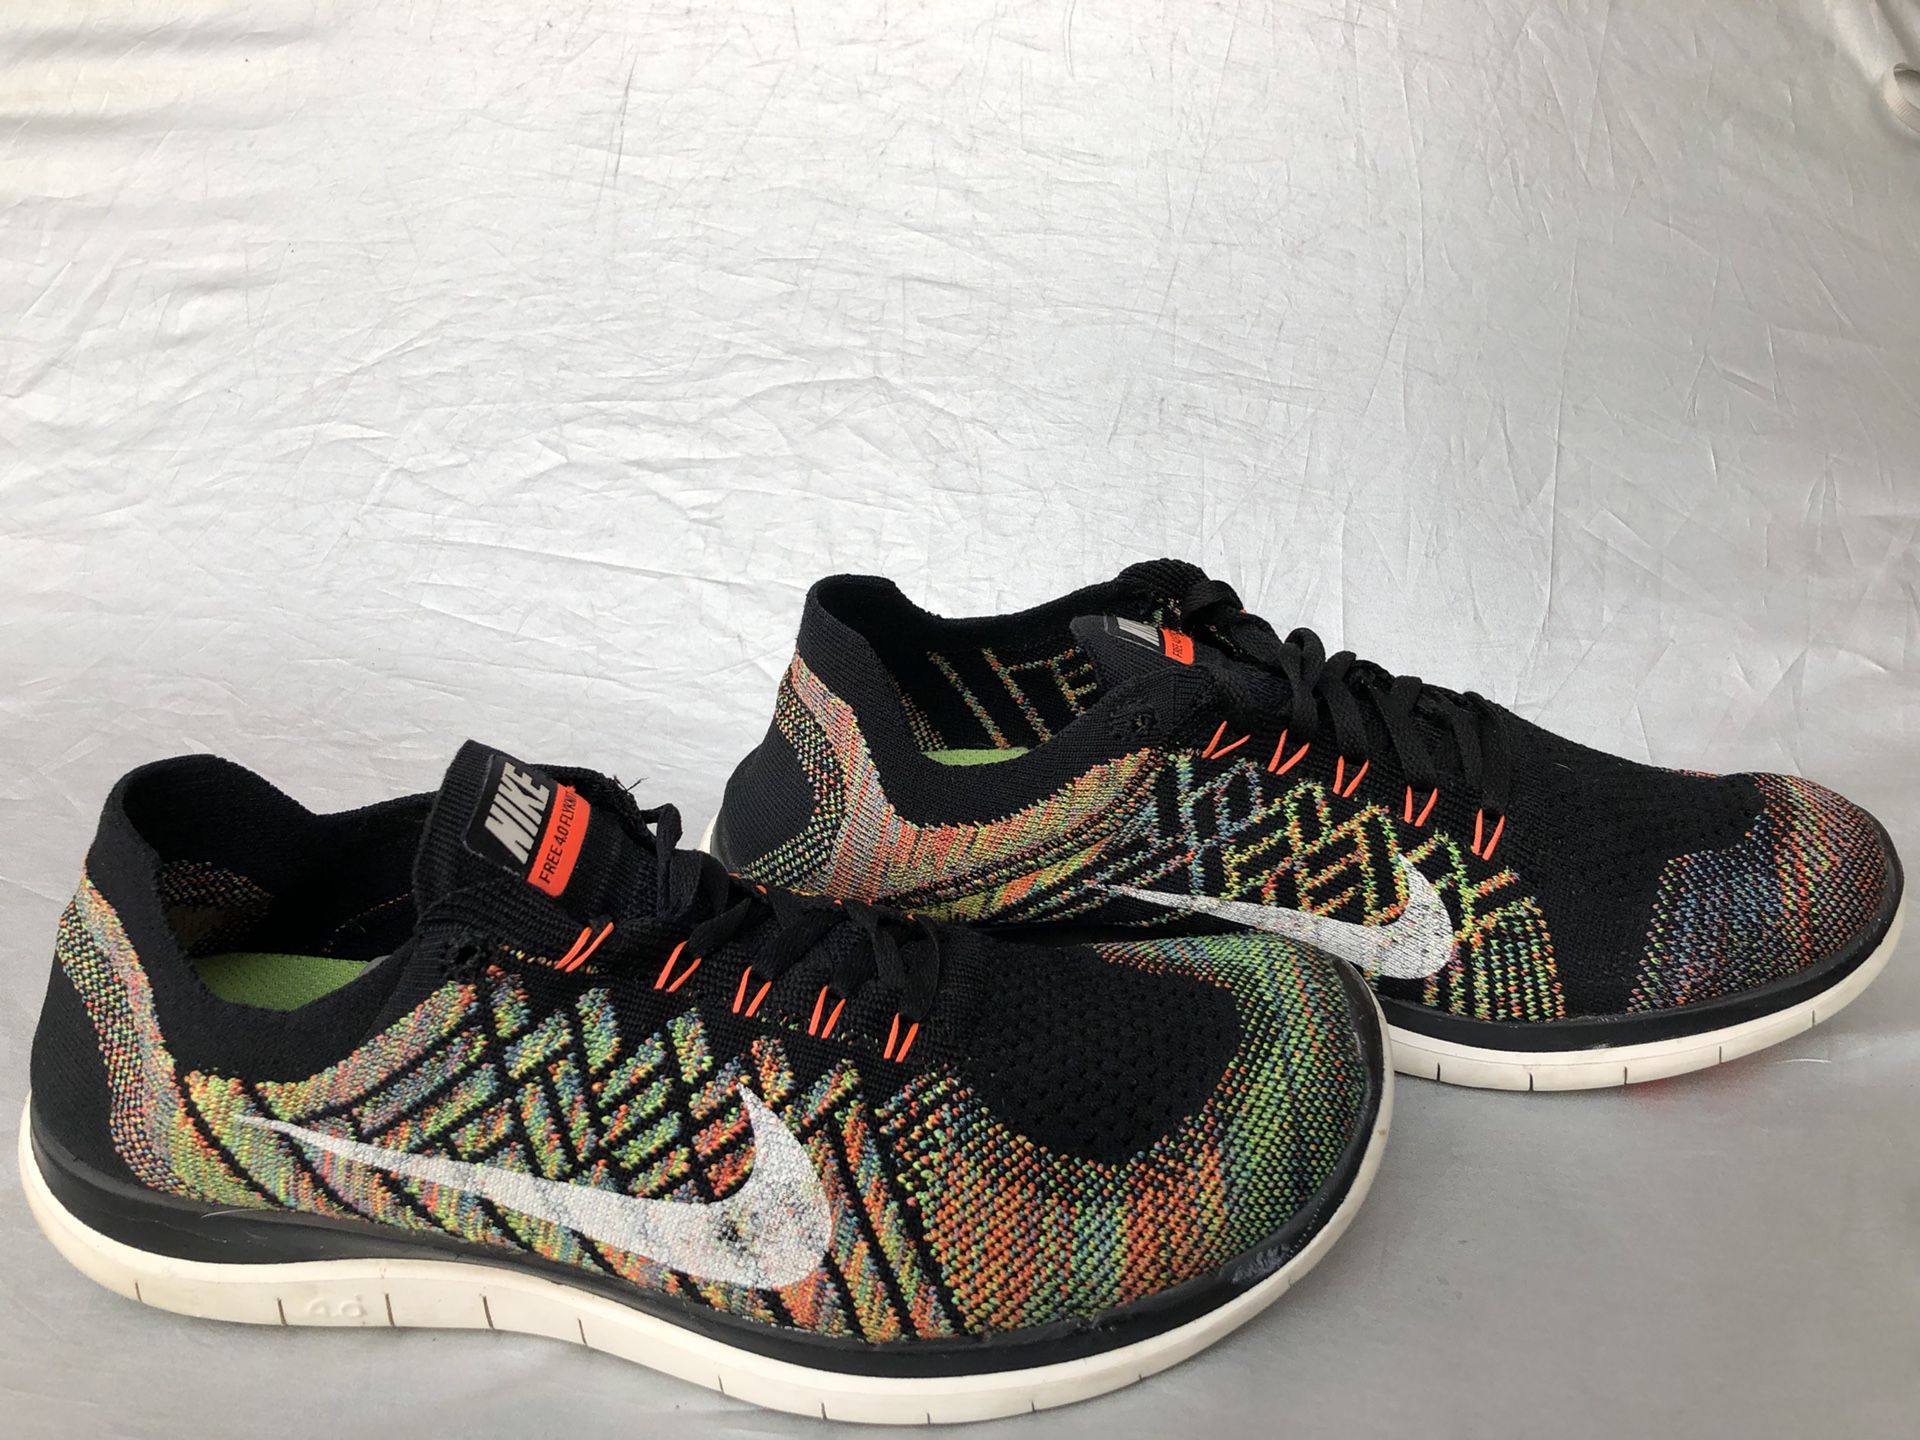 Nike Free 4.0 FlyKnit MultiColor 717075-011 No Box for Sale in Vancouver, WA OfferUp